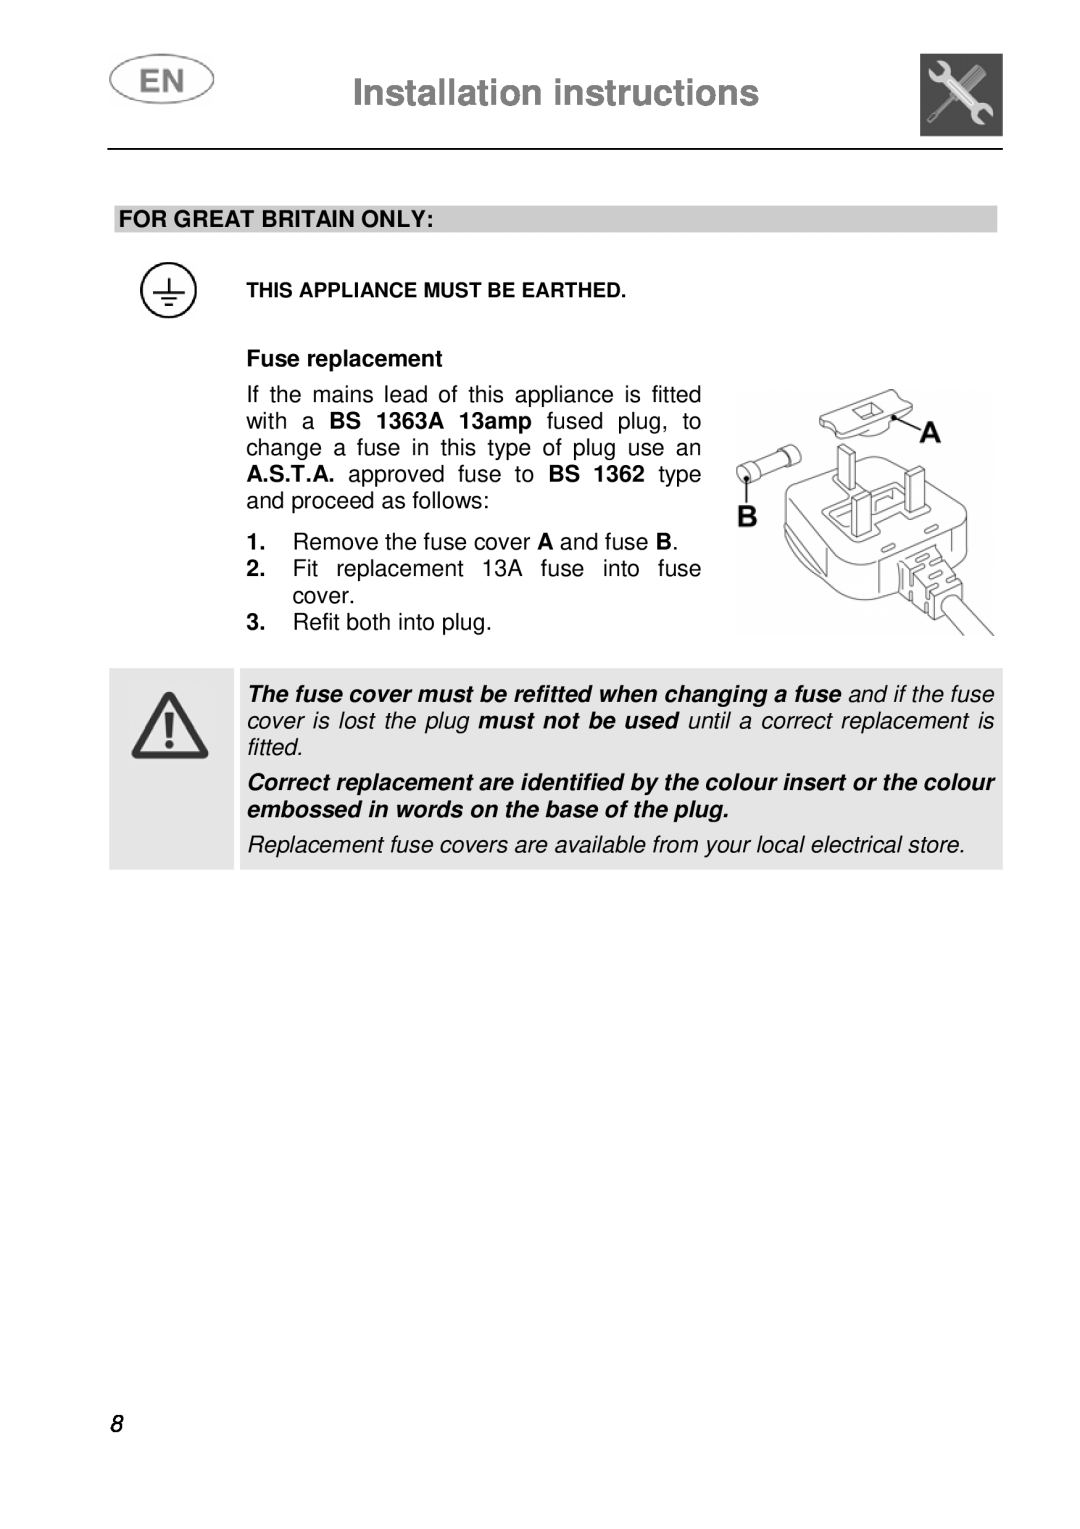 Smeg LVF649B instruction manual Installation instructions, For Great Britain Only, Fuse replacement 